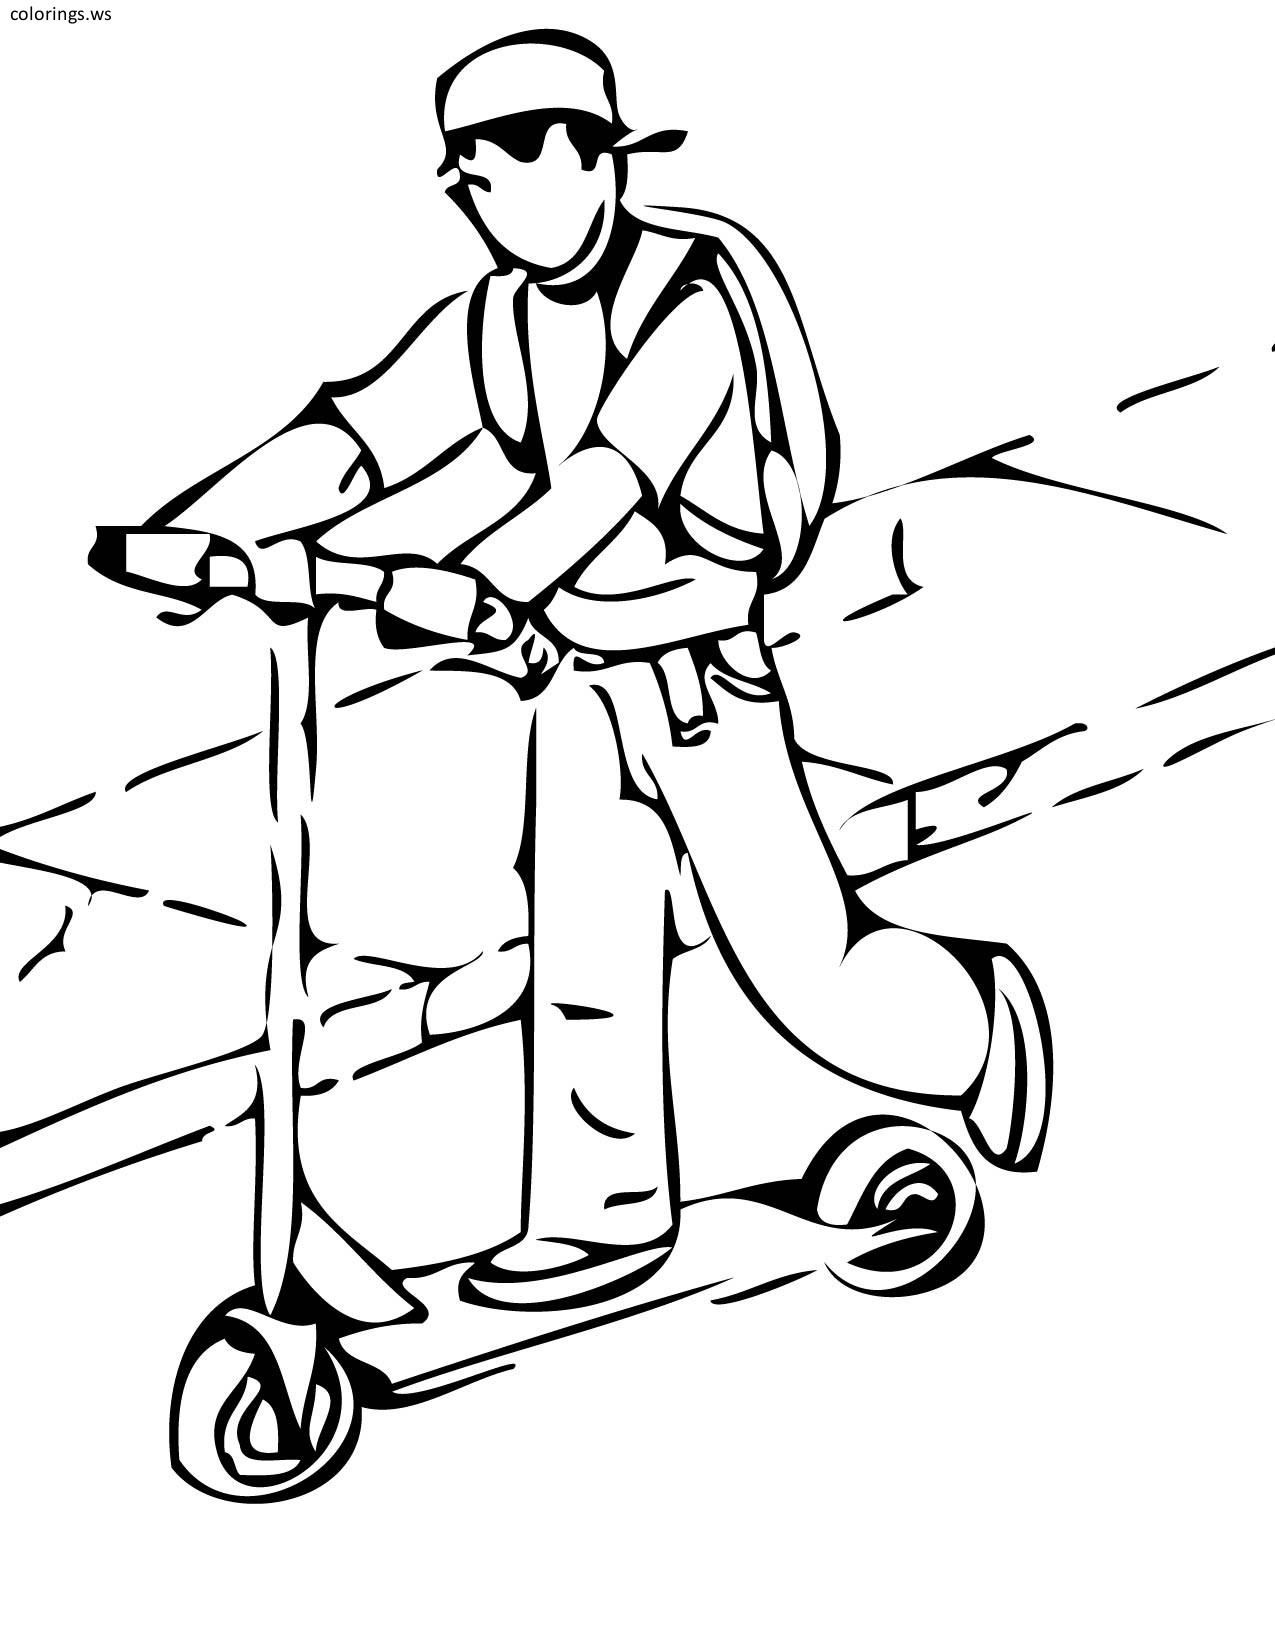 Pro Scooter 01, Pro Scooter Coloring Pages, Free Printable ...